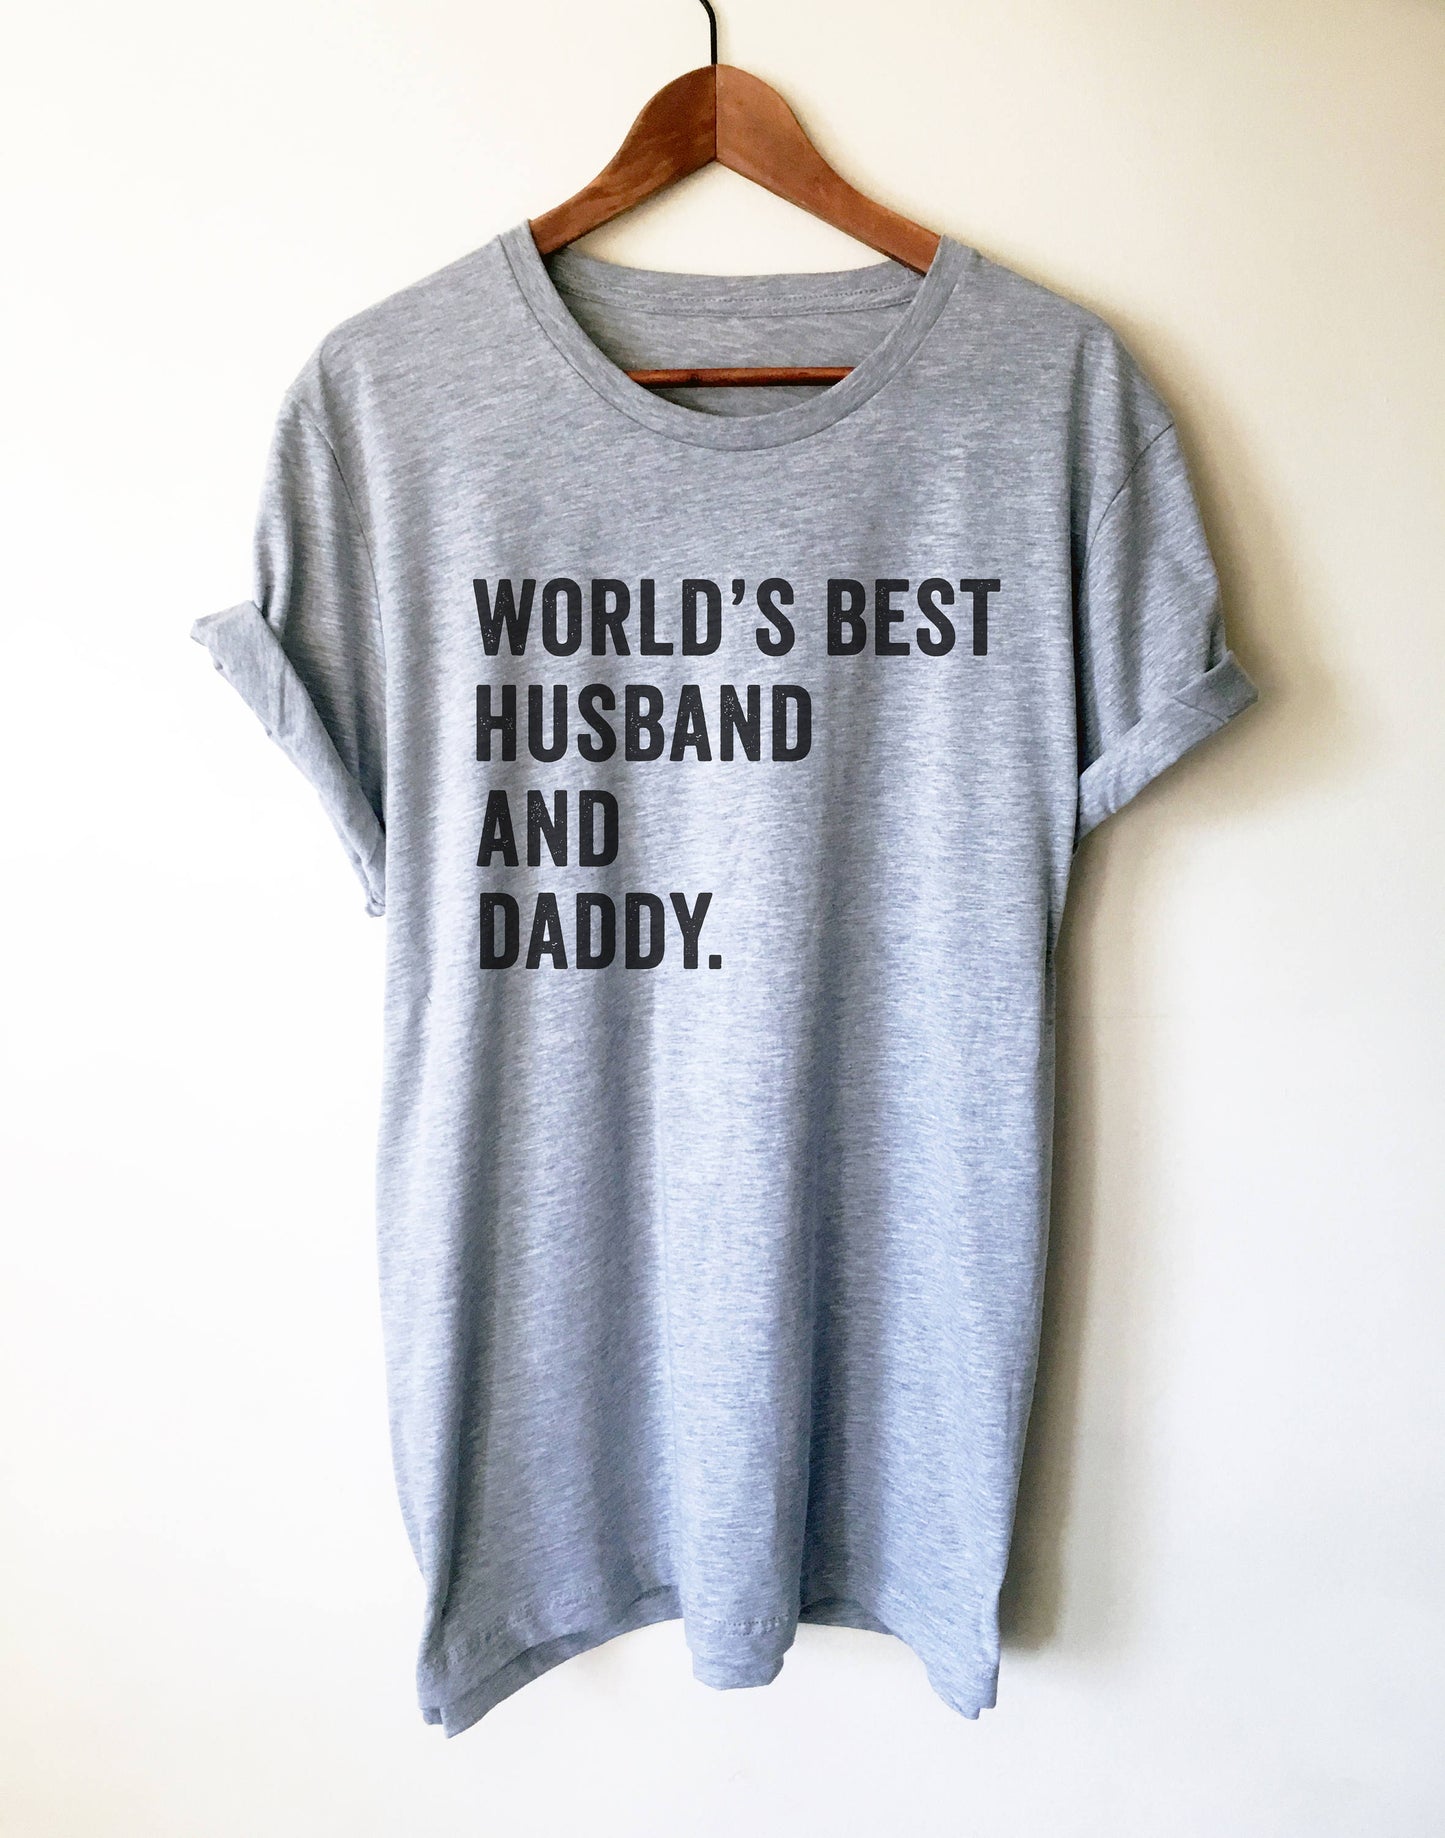 World's Best Husband & Daddy Unisex Shirt- Fathers Day Gift, Gift For Dad, Pregnancy Reveal Shirt, Husband Shirt, Hubby Shirt, New Dad Shirt